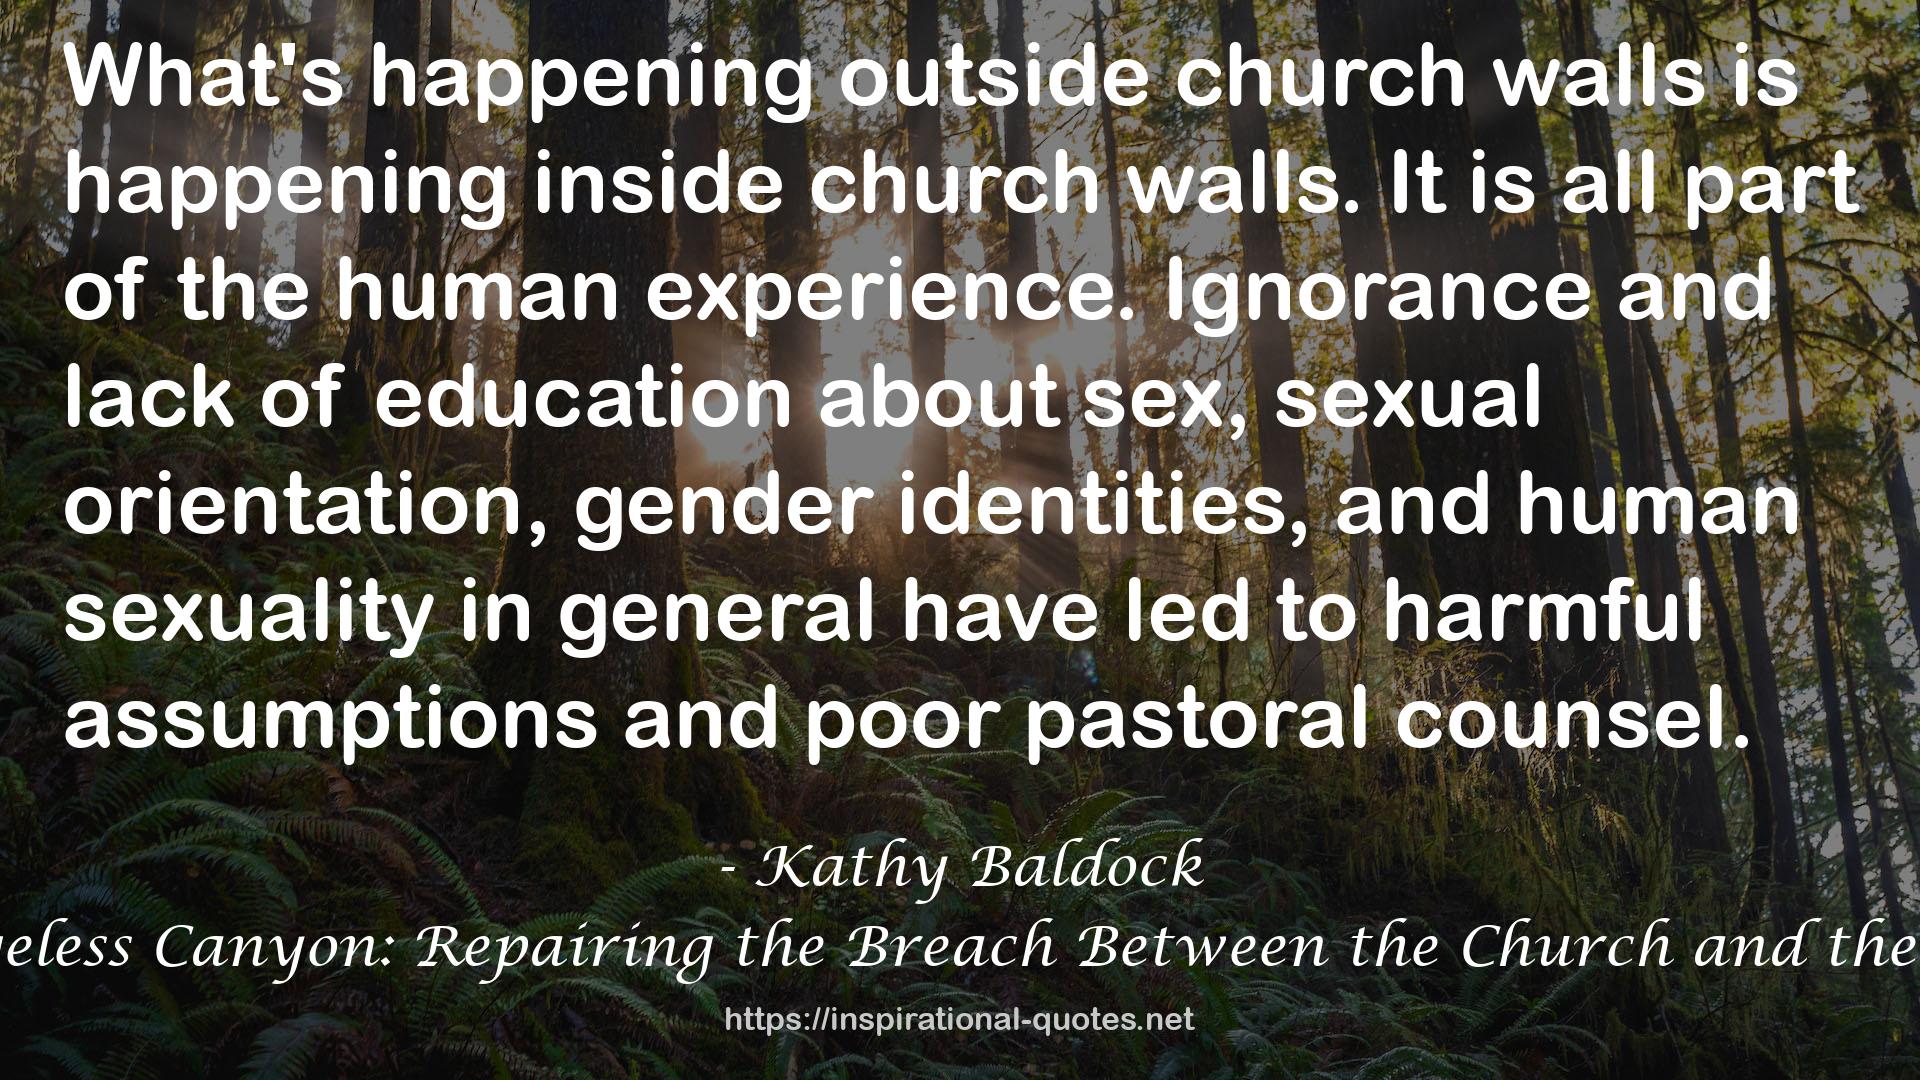 Walking the Bridgeless Canyon: Repairing the Breach Between the Church and the LGBT Community QUOTES